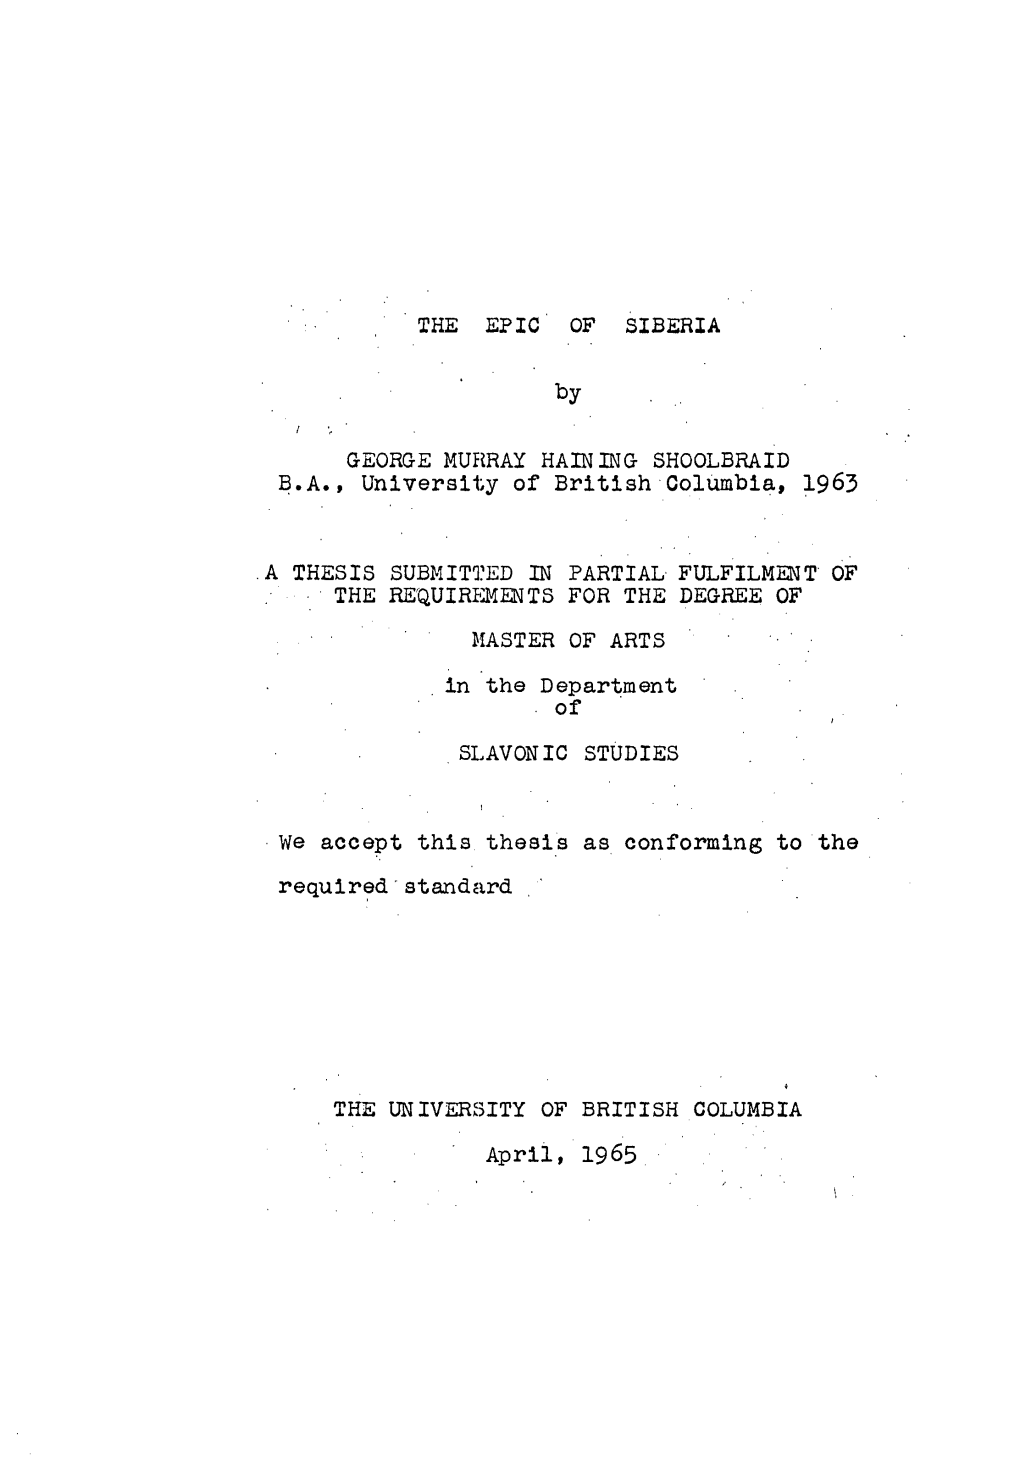 THE EPIC of SIBERIA by GEORGE MURRAY HAINING SHOOLBRAID B.A., University of British Columbia, 1963 a THESIS SUBMITTED in PARTIAL